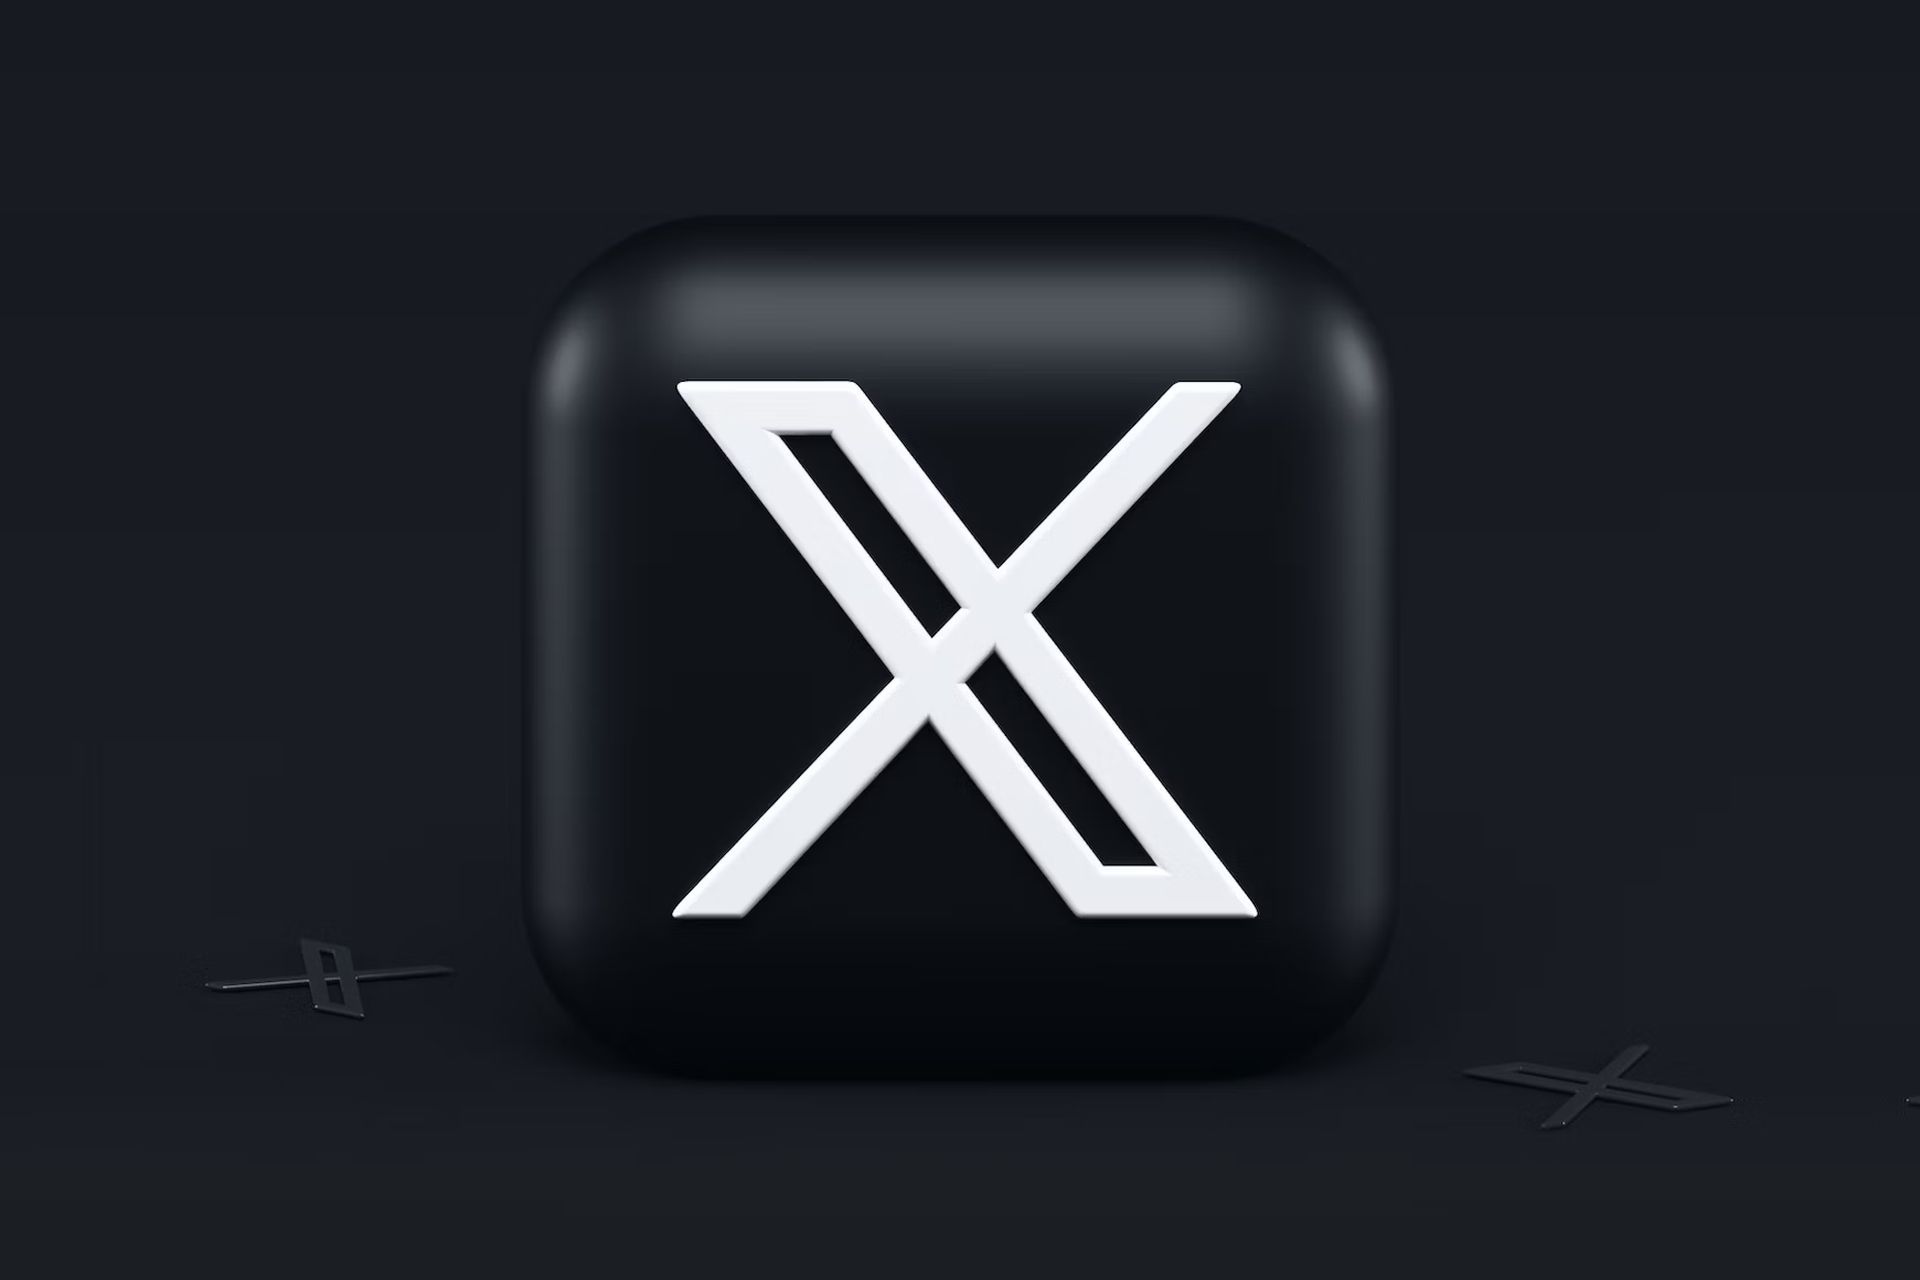 Does Microsoft really own the X trademark?